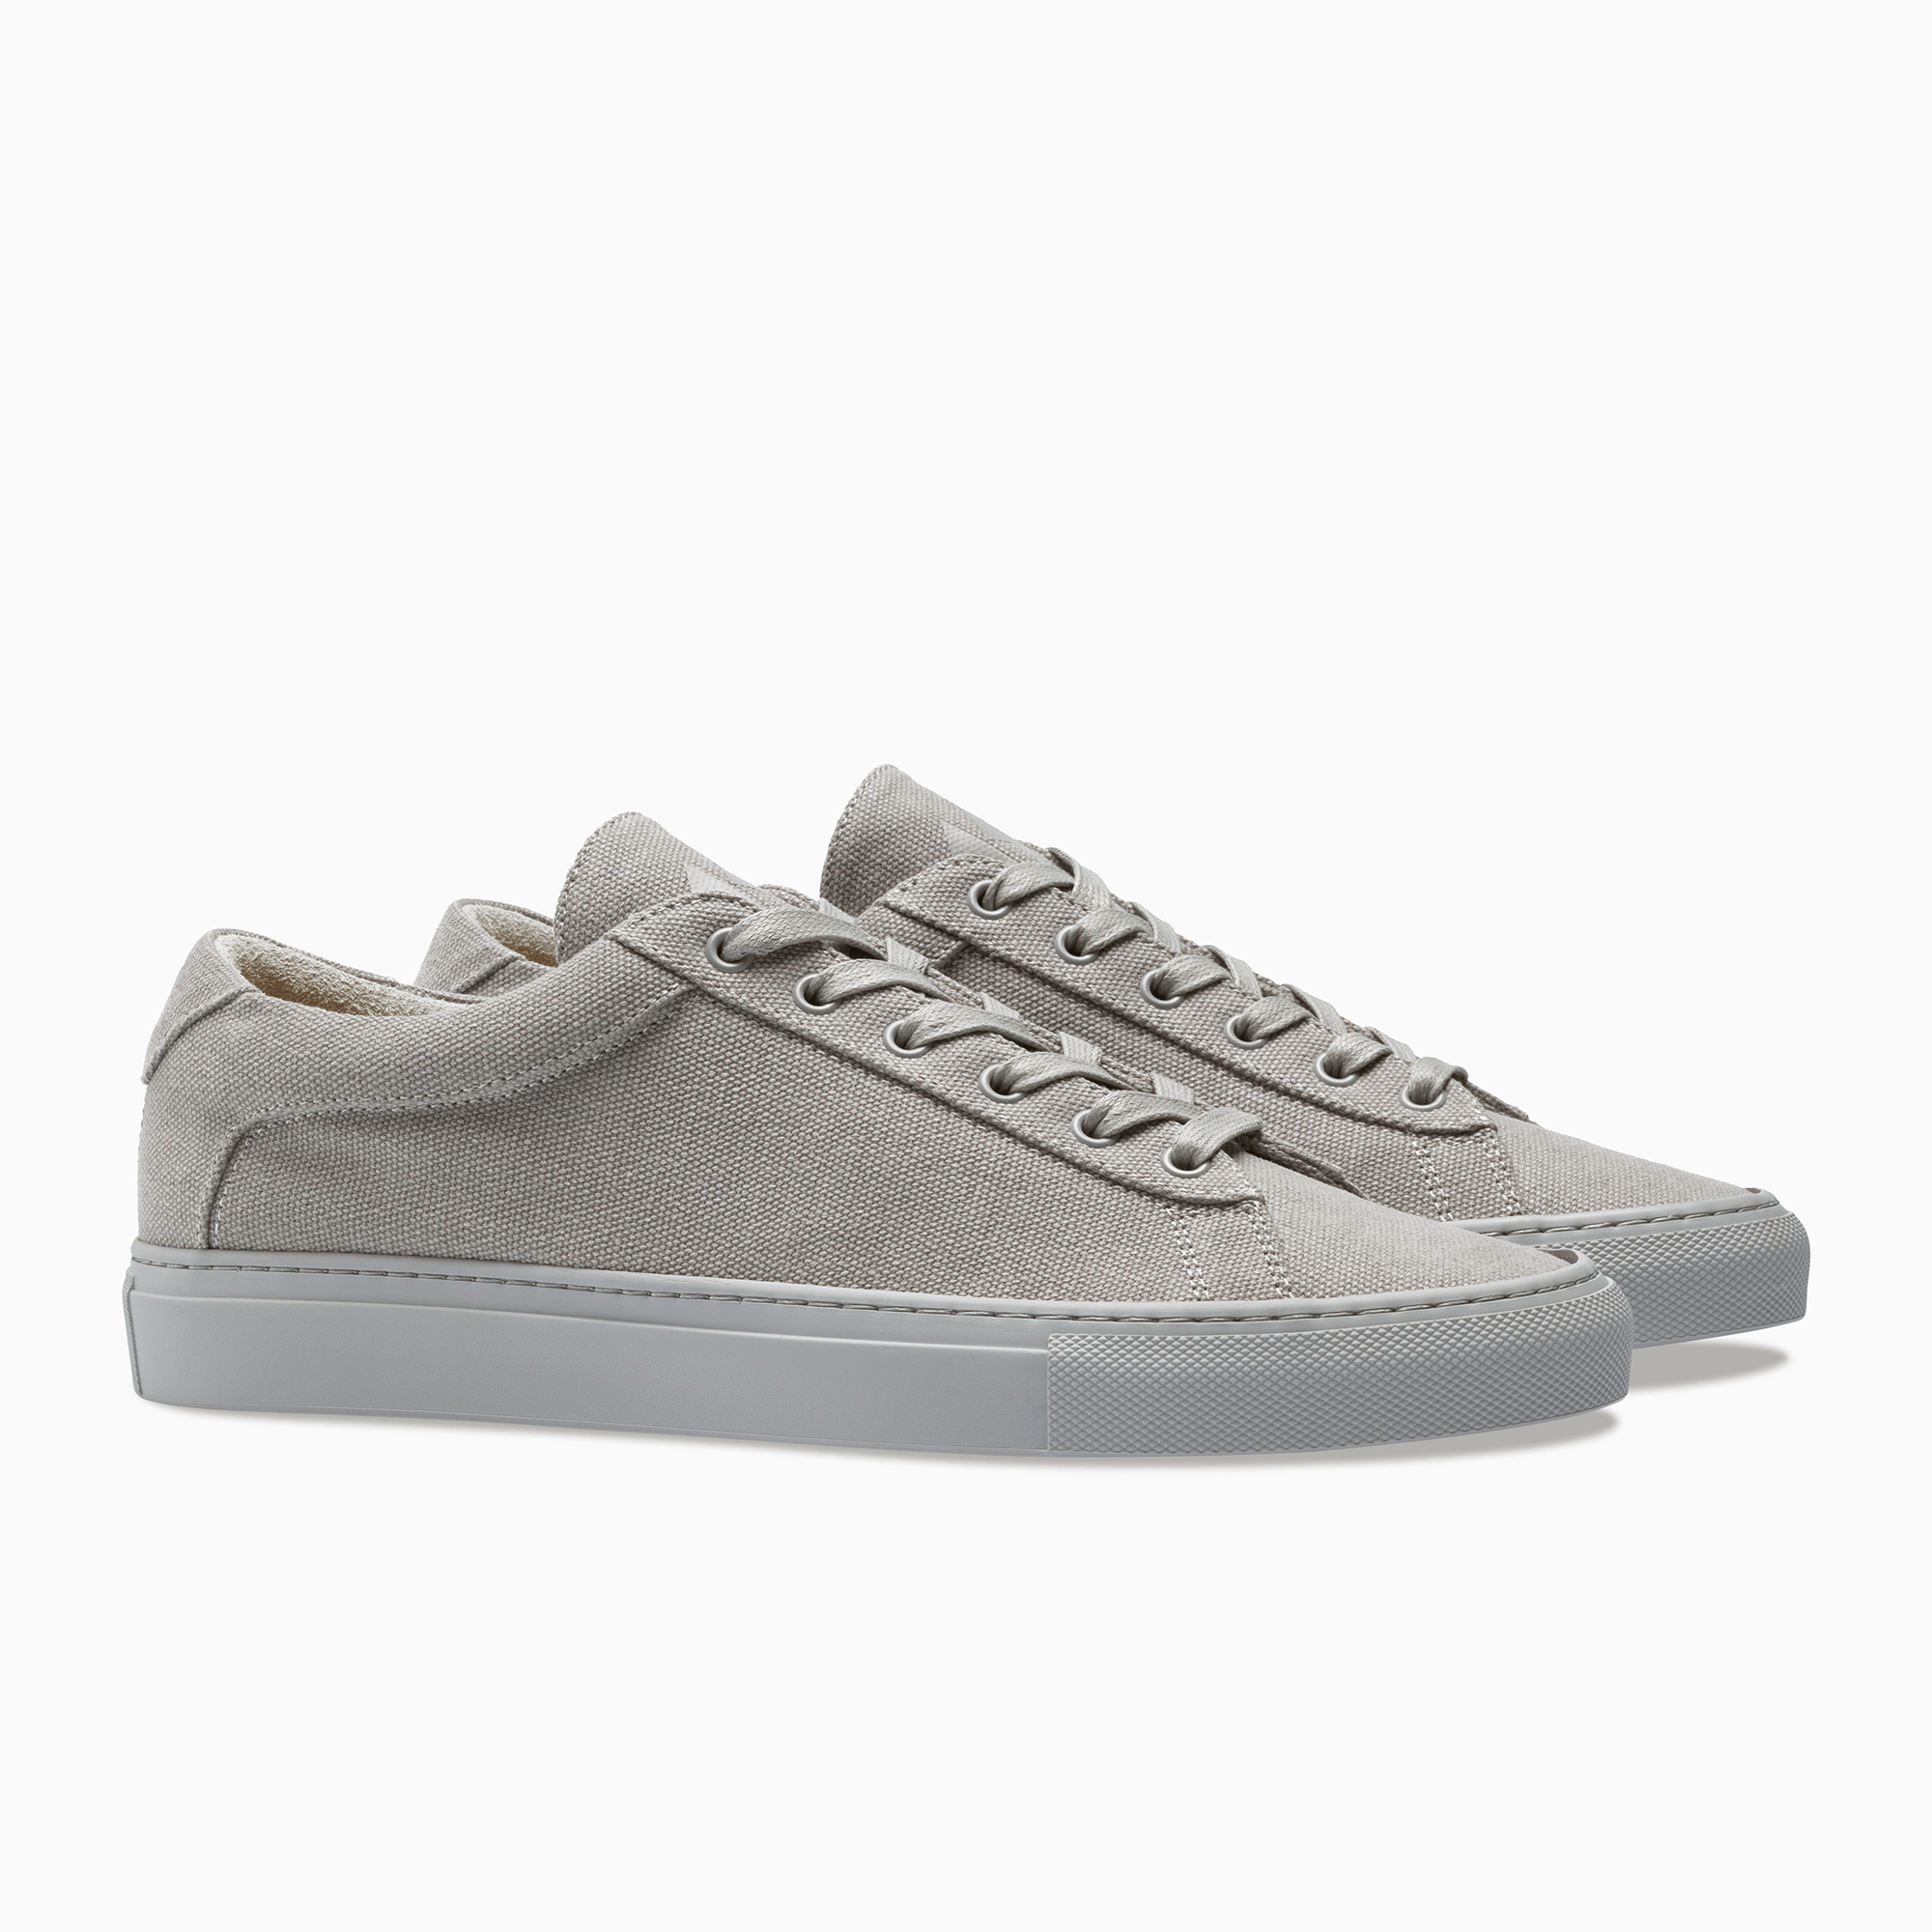  Grey Low Top Canvas Sneaker white sole  Womens Koio